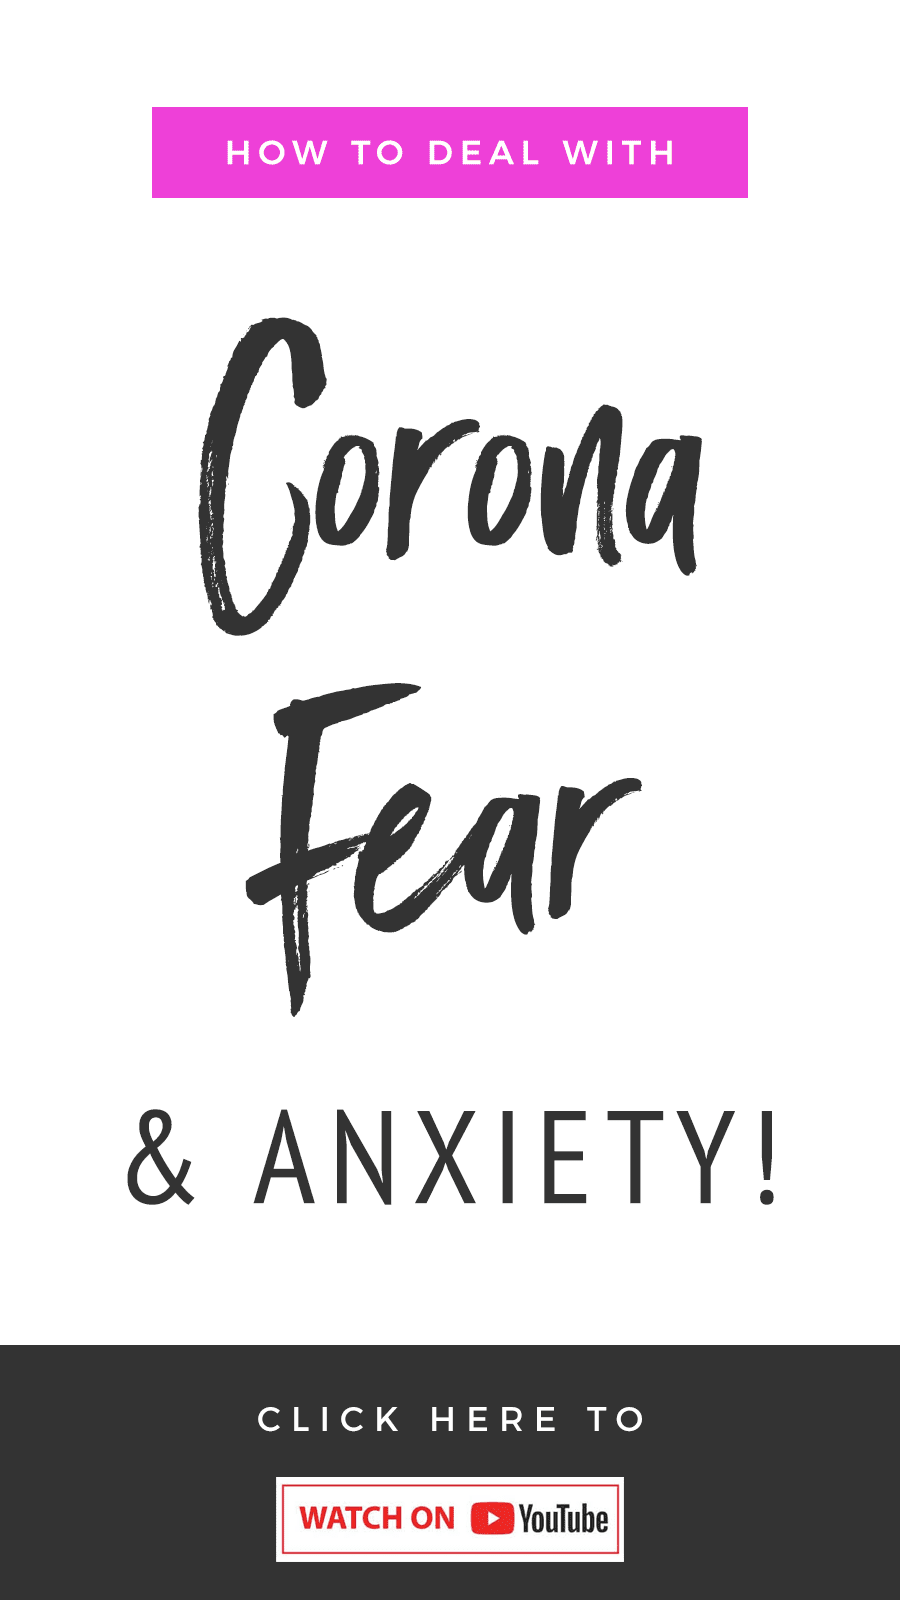 How To Deal With Corona-Fear & Anxiety